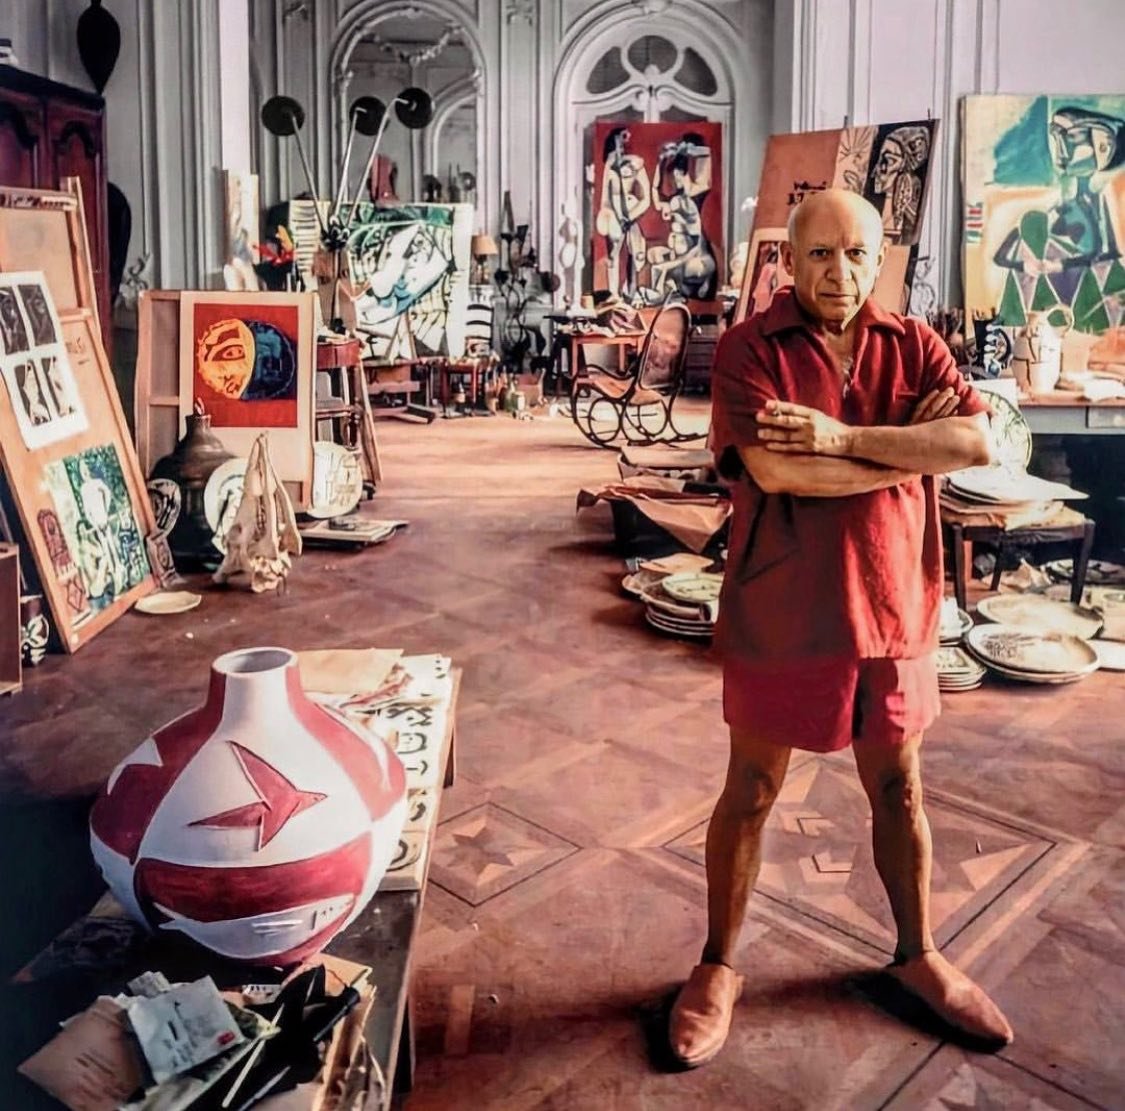 &ldquo;Painting is just another way of keeping a diary.&rdquo; Pablo Picasso

Picasso in his studio 🧡